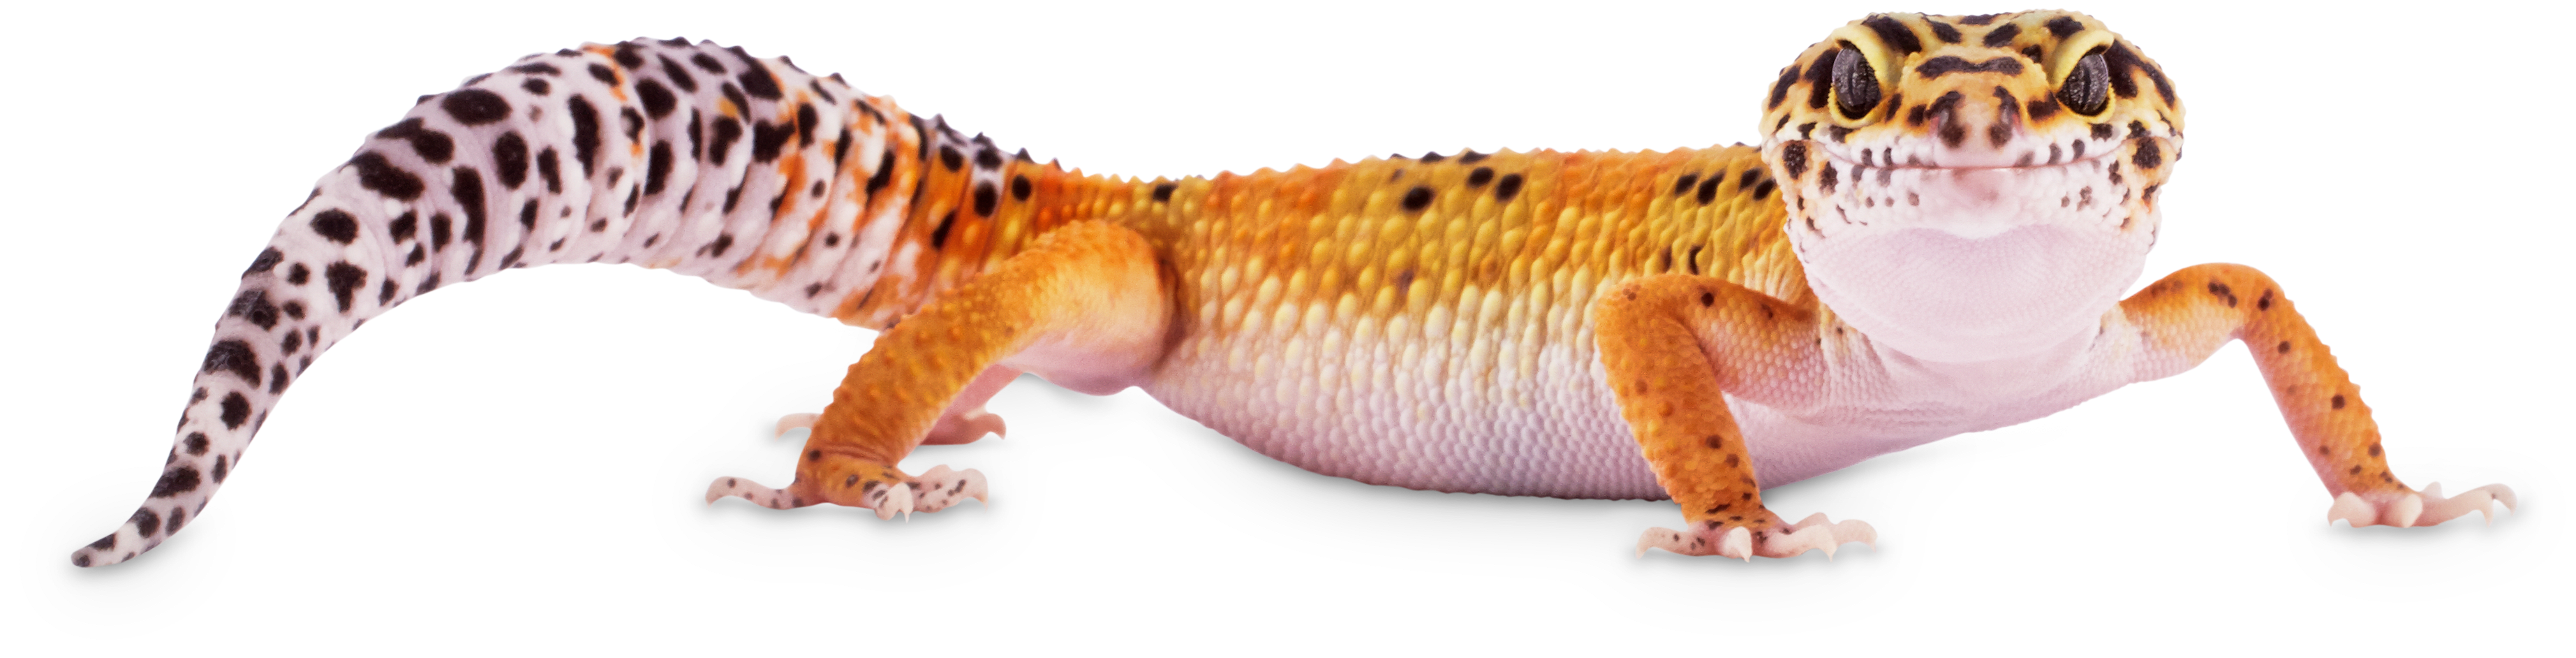 Fun Facts about Leopard Geckos | Petco